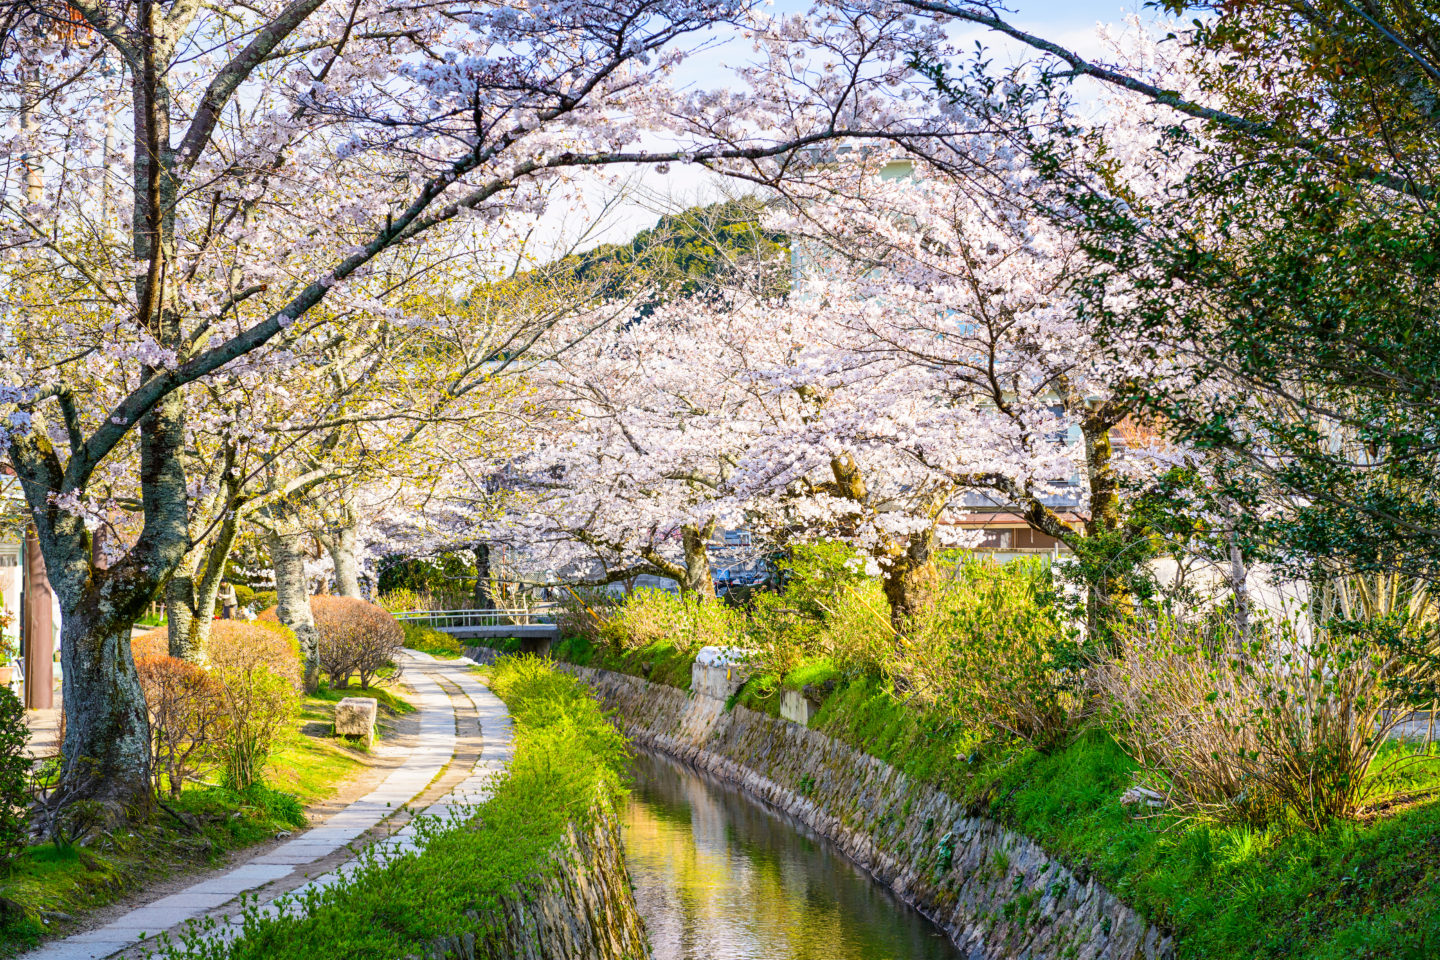 Best Things To Do In Kyoto, Japan: The Philosopher's Path